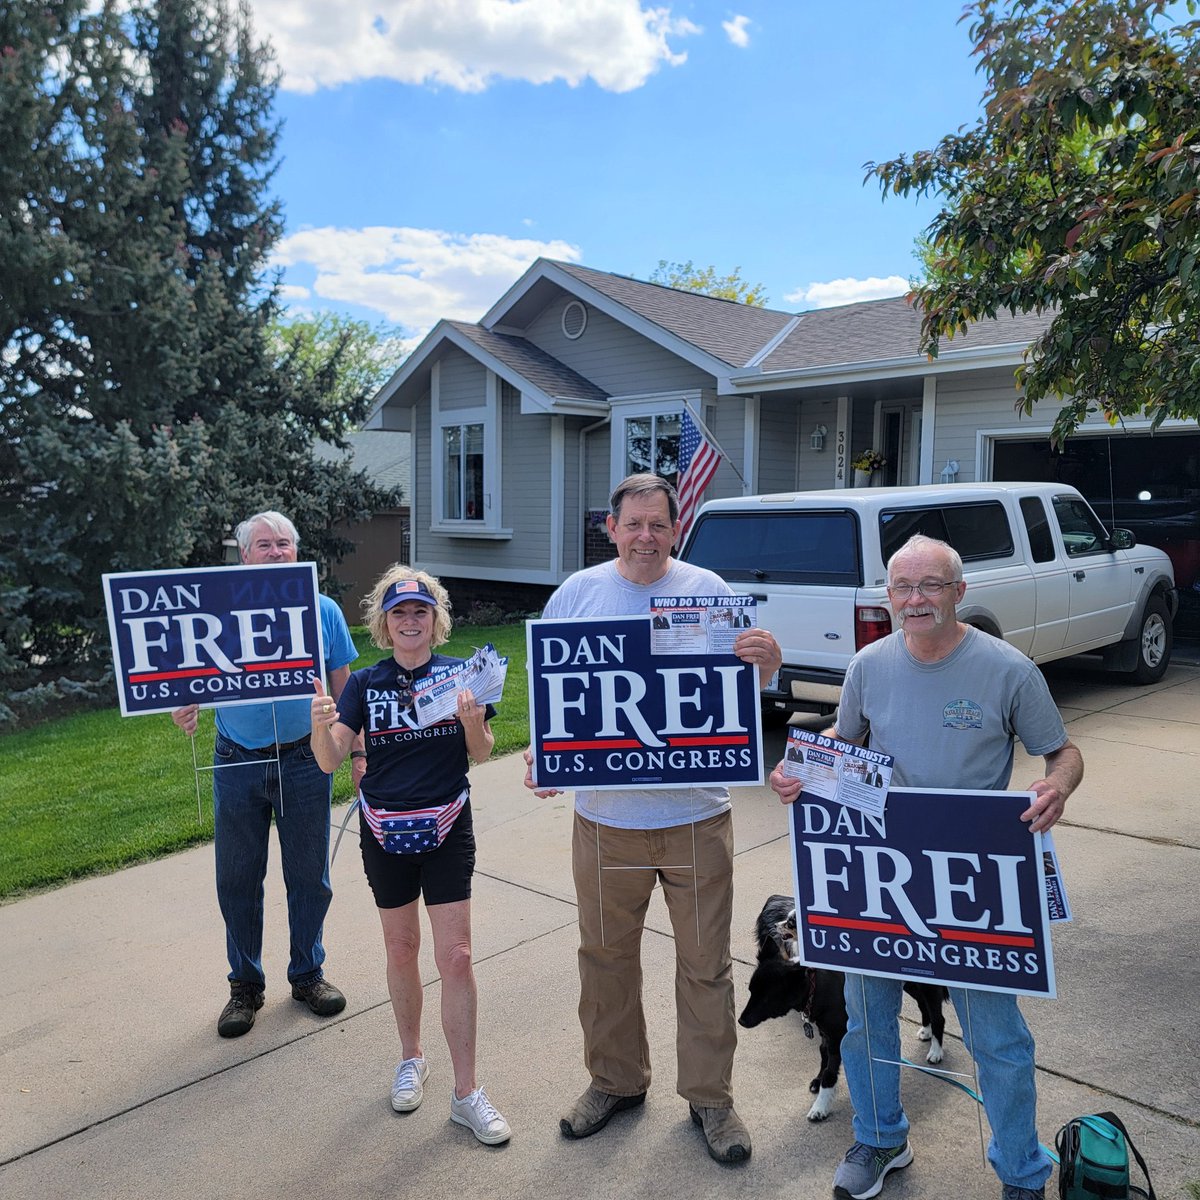 Let’s Go! 🔥🔥🔥 Hey Nebraska, if you haven’t voted yet, you still have 30 minutes to vote for Dan Frei for congress.